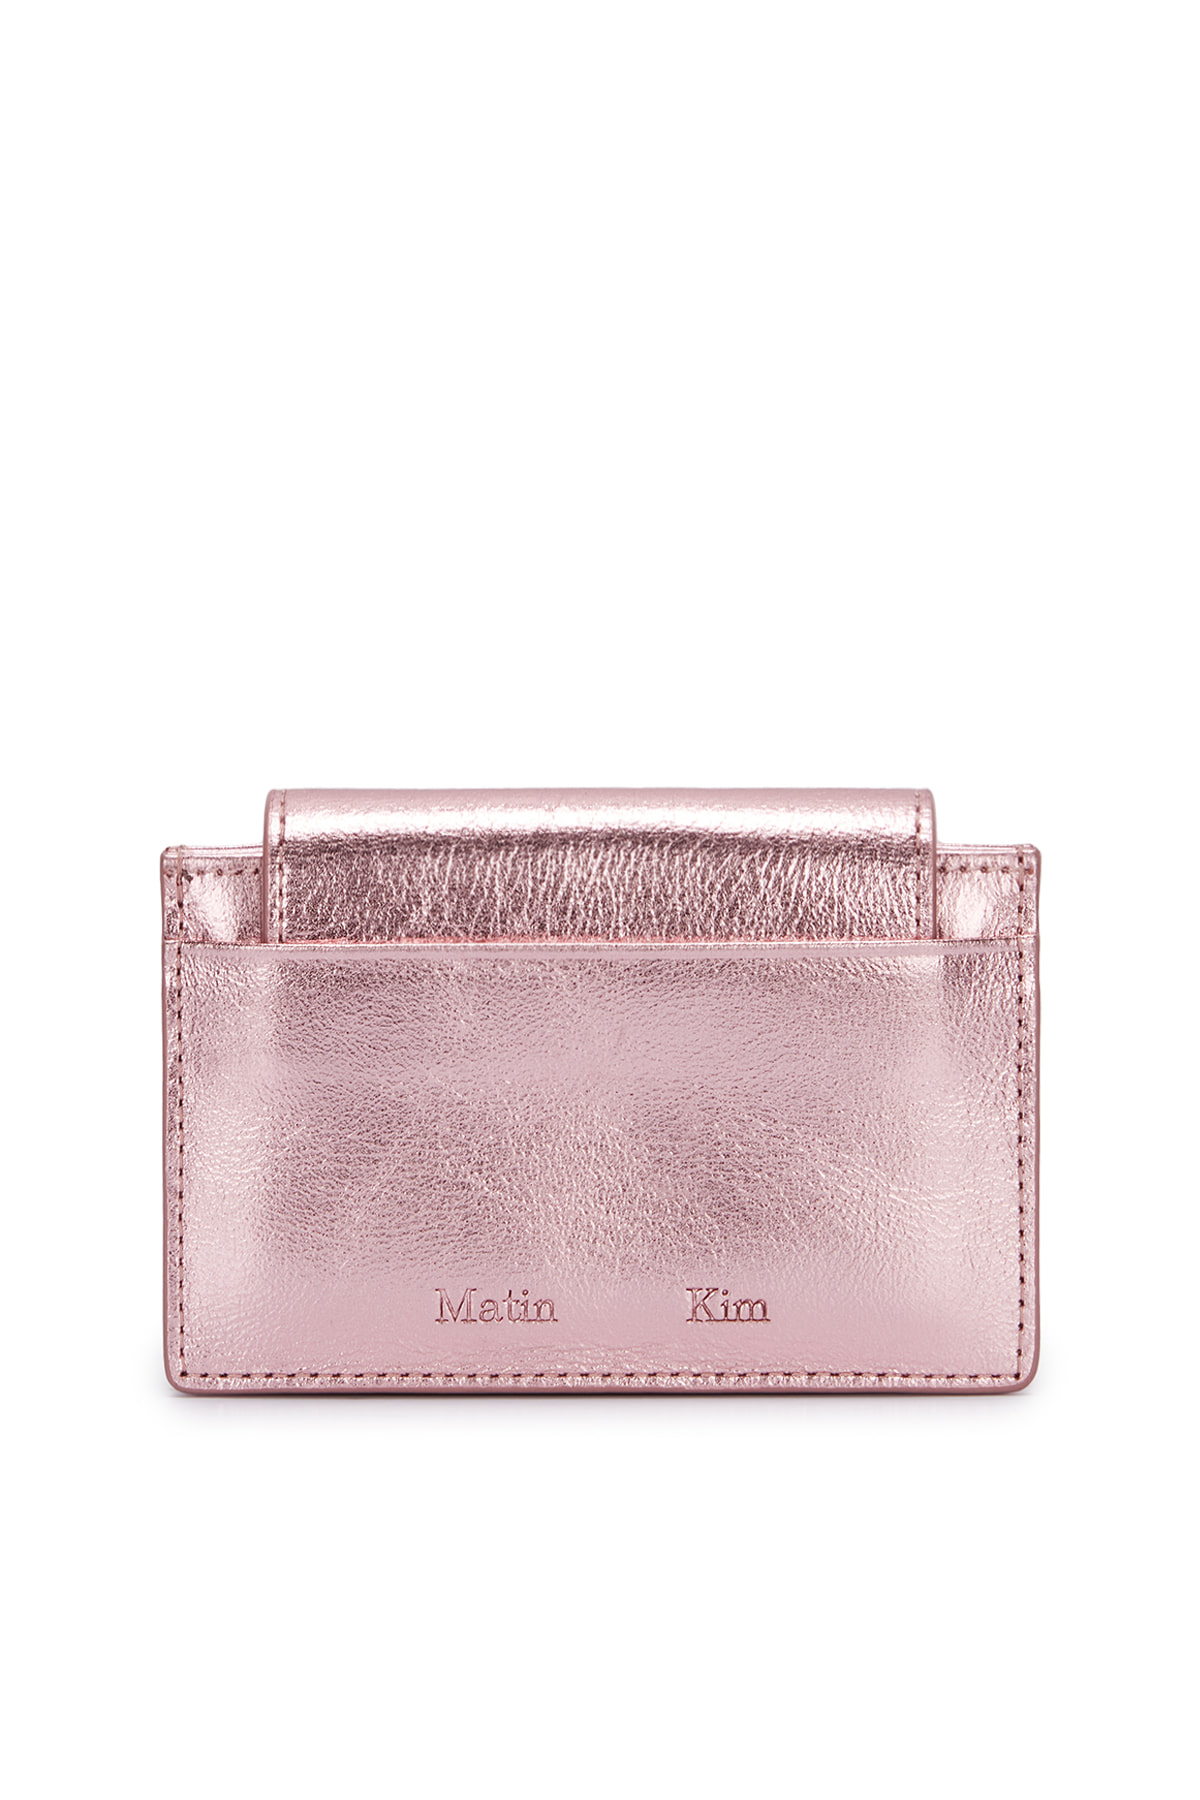 ACCORDION WALLET IN INDIAN PINK